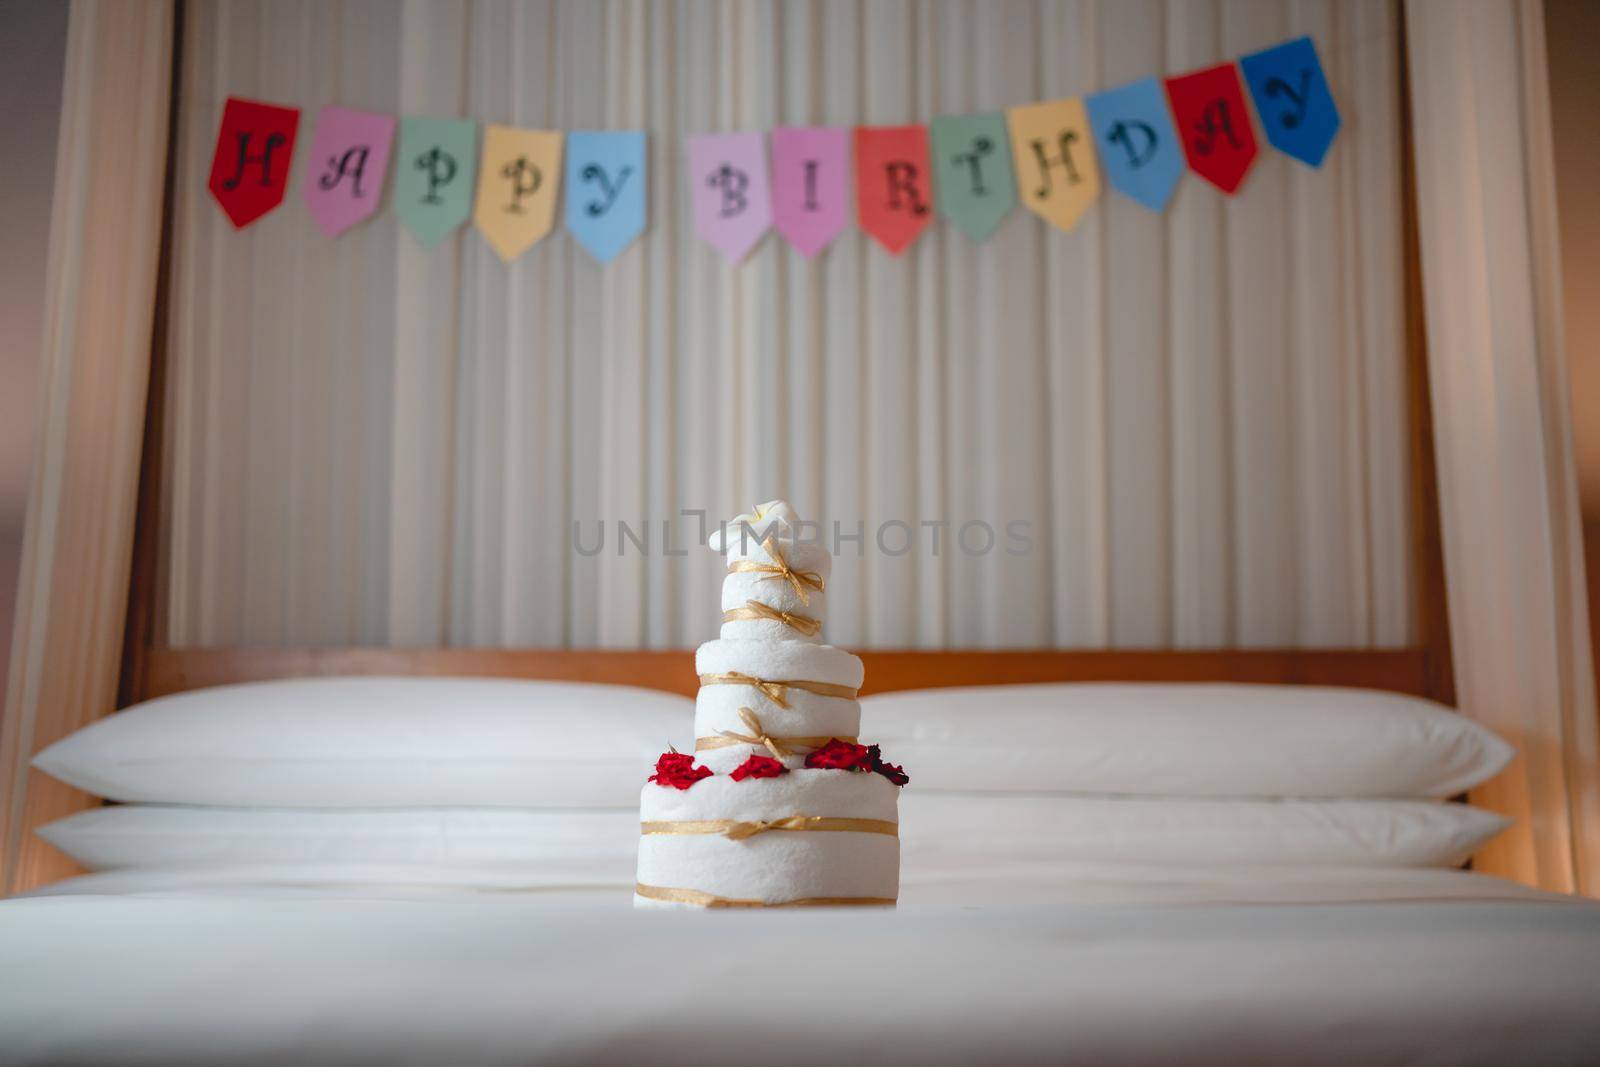 Celebrating Birthday, surprise in bed with Happy birthday banner and towel cake. by sirawit99